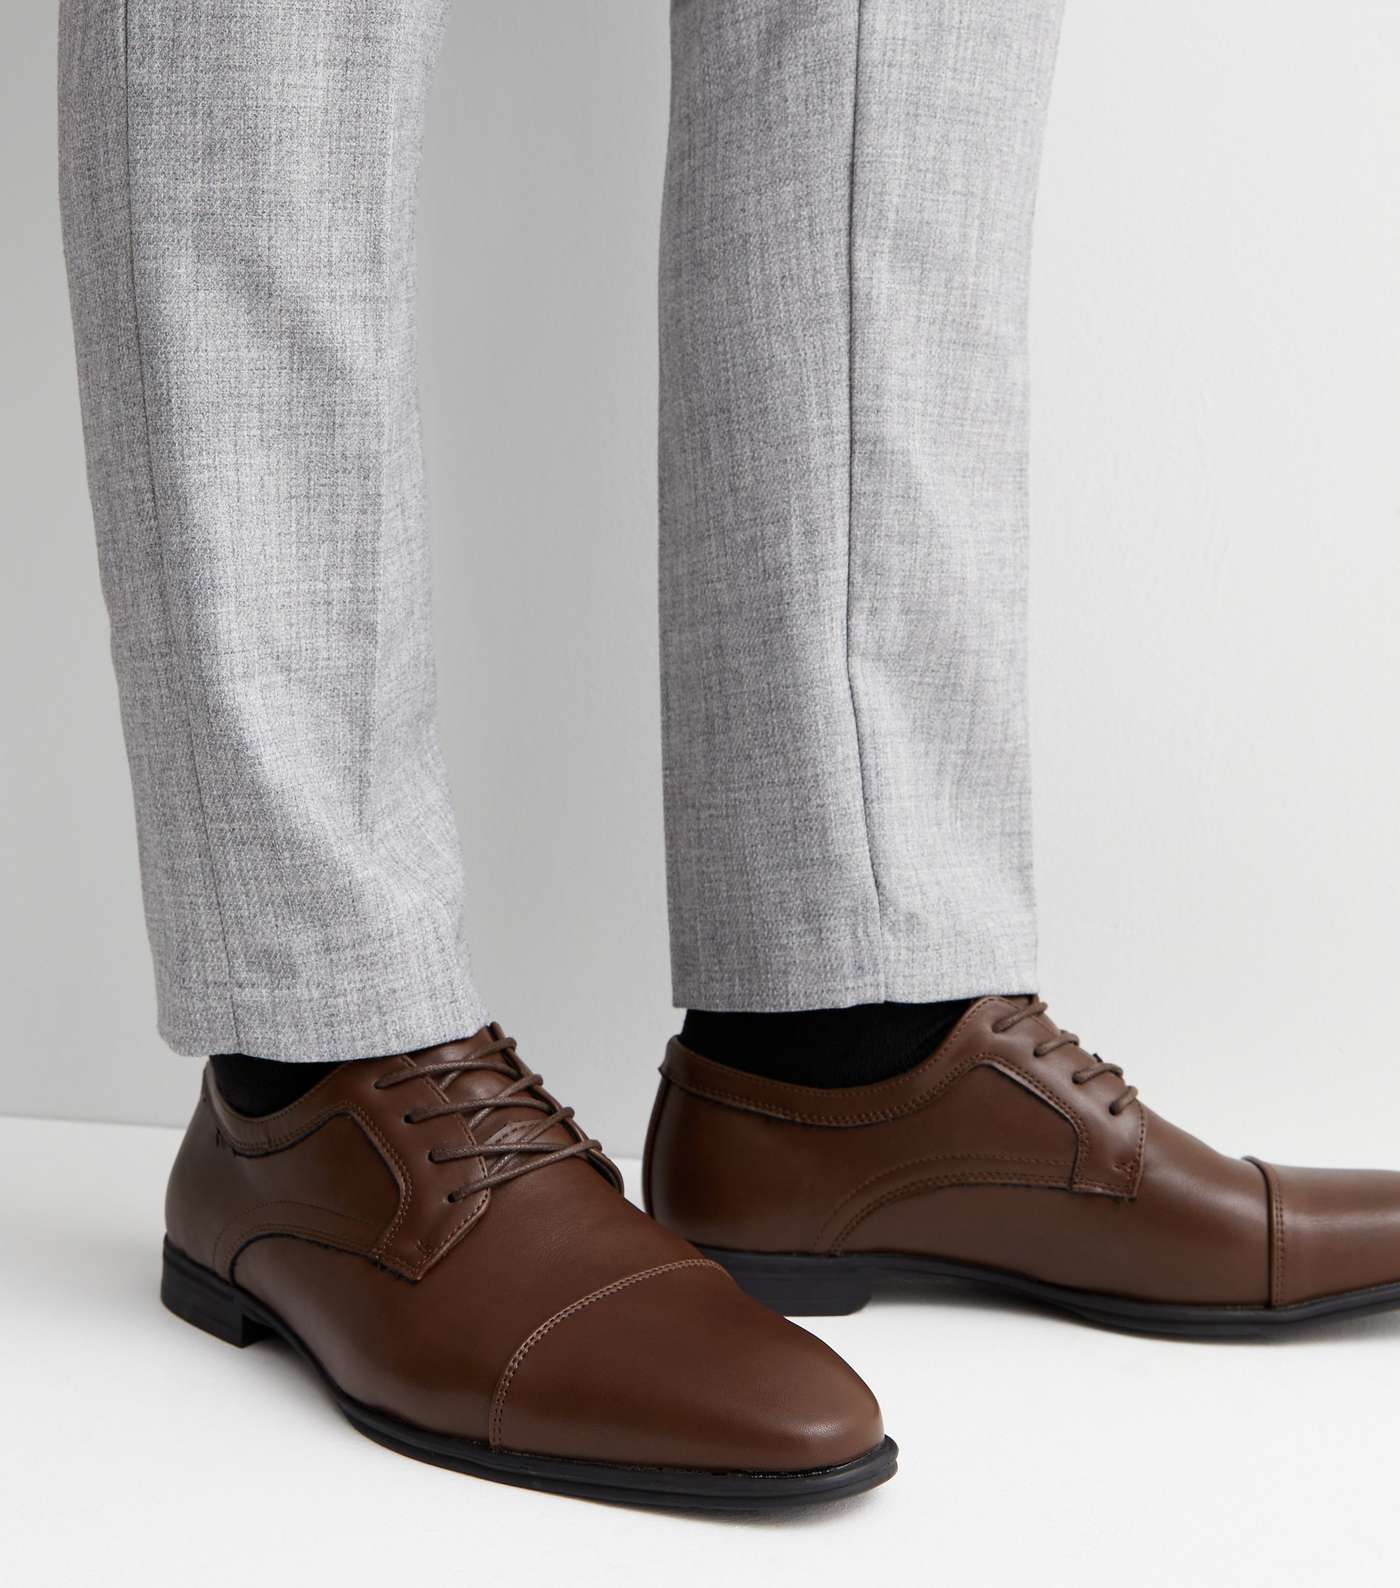 Dark Brown Leather-Look Oxford Shoes Image 2